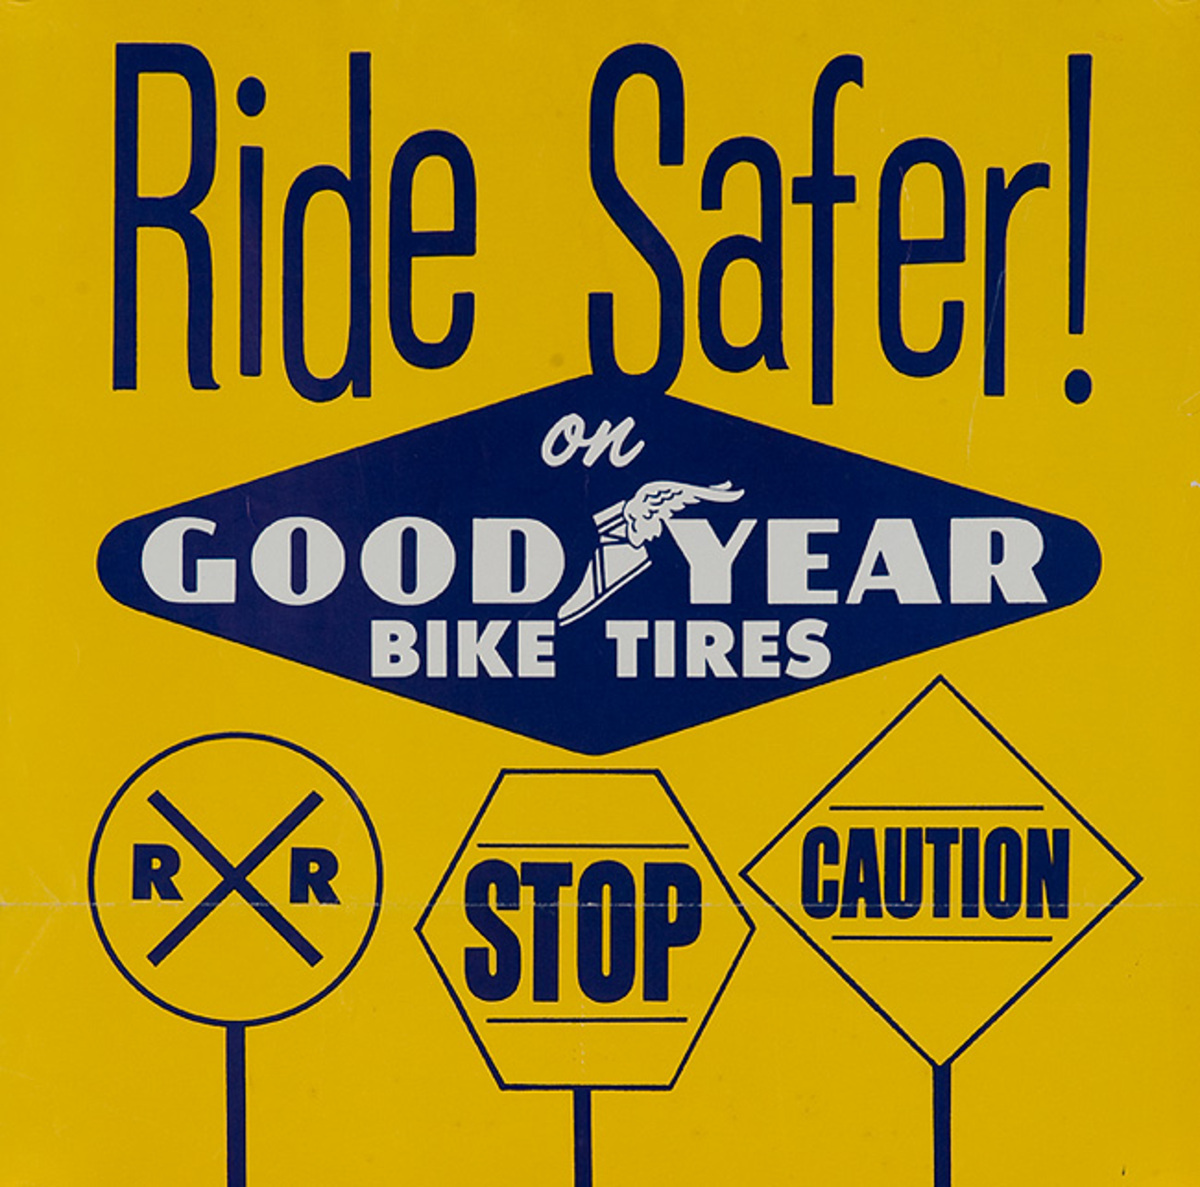 Ride Safer Original American 1950s Bicycle Shop Poster